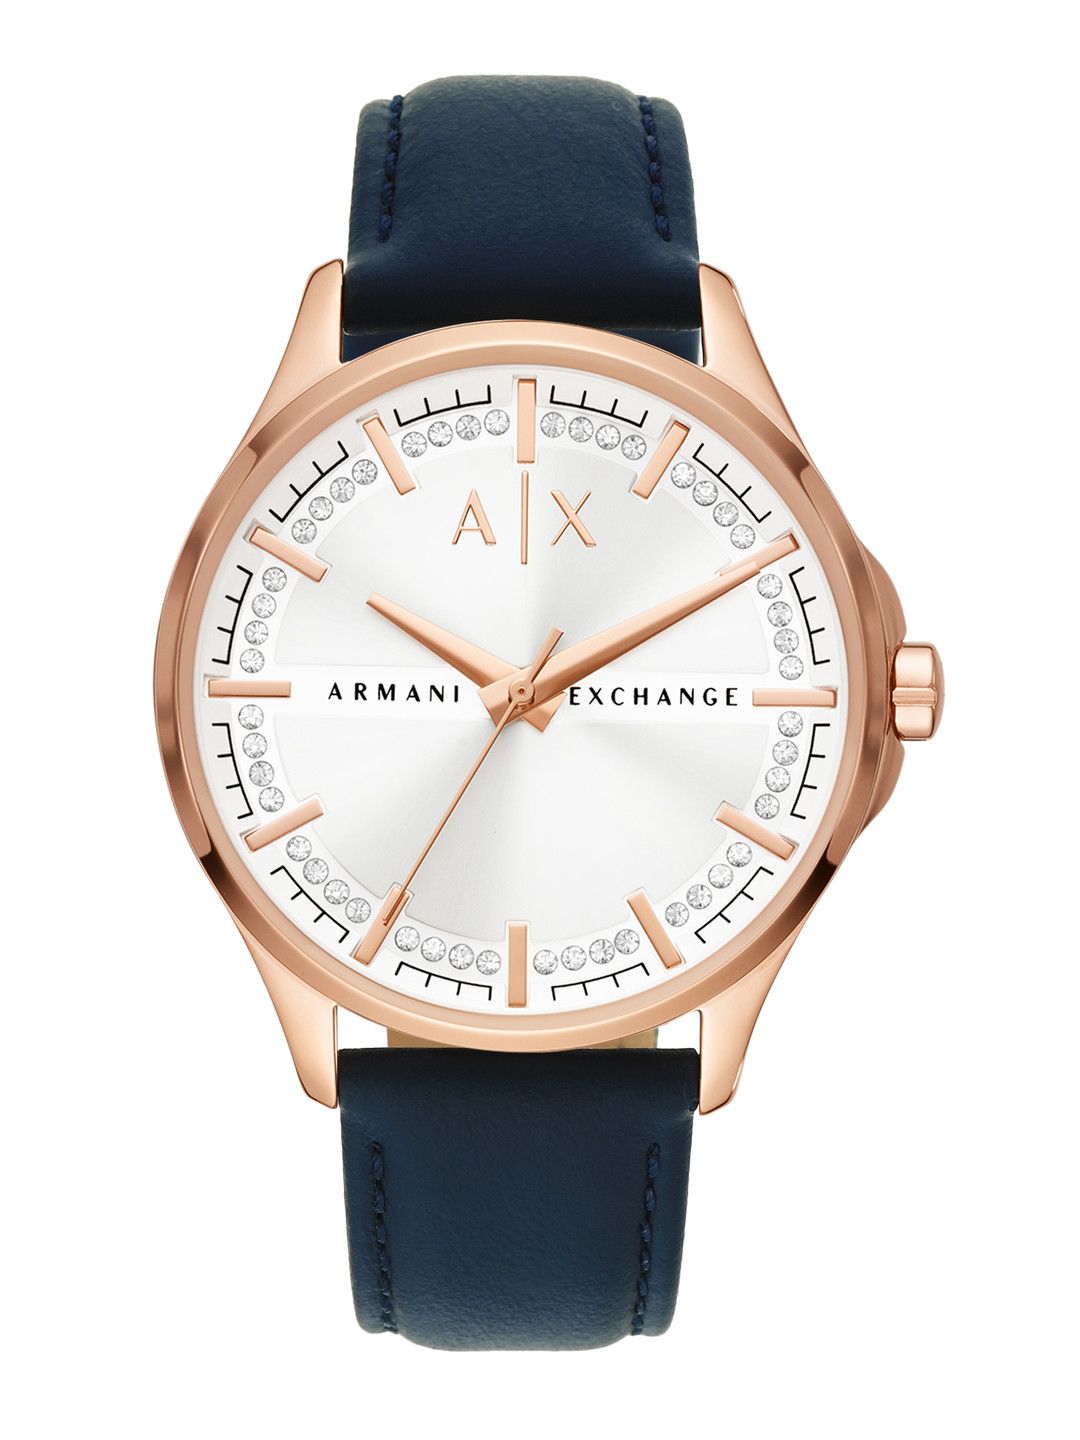 Armani Exchange Women White Dial & Navy Leather Straps Analogue Watch AX5260 Price in India